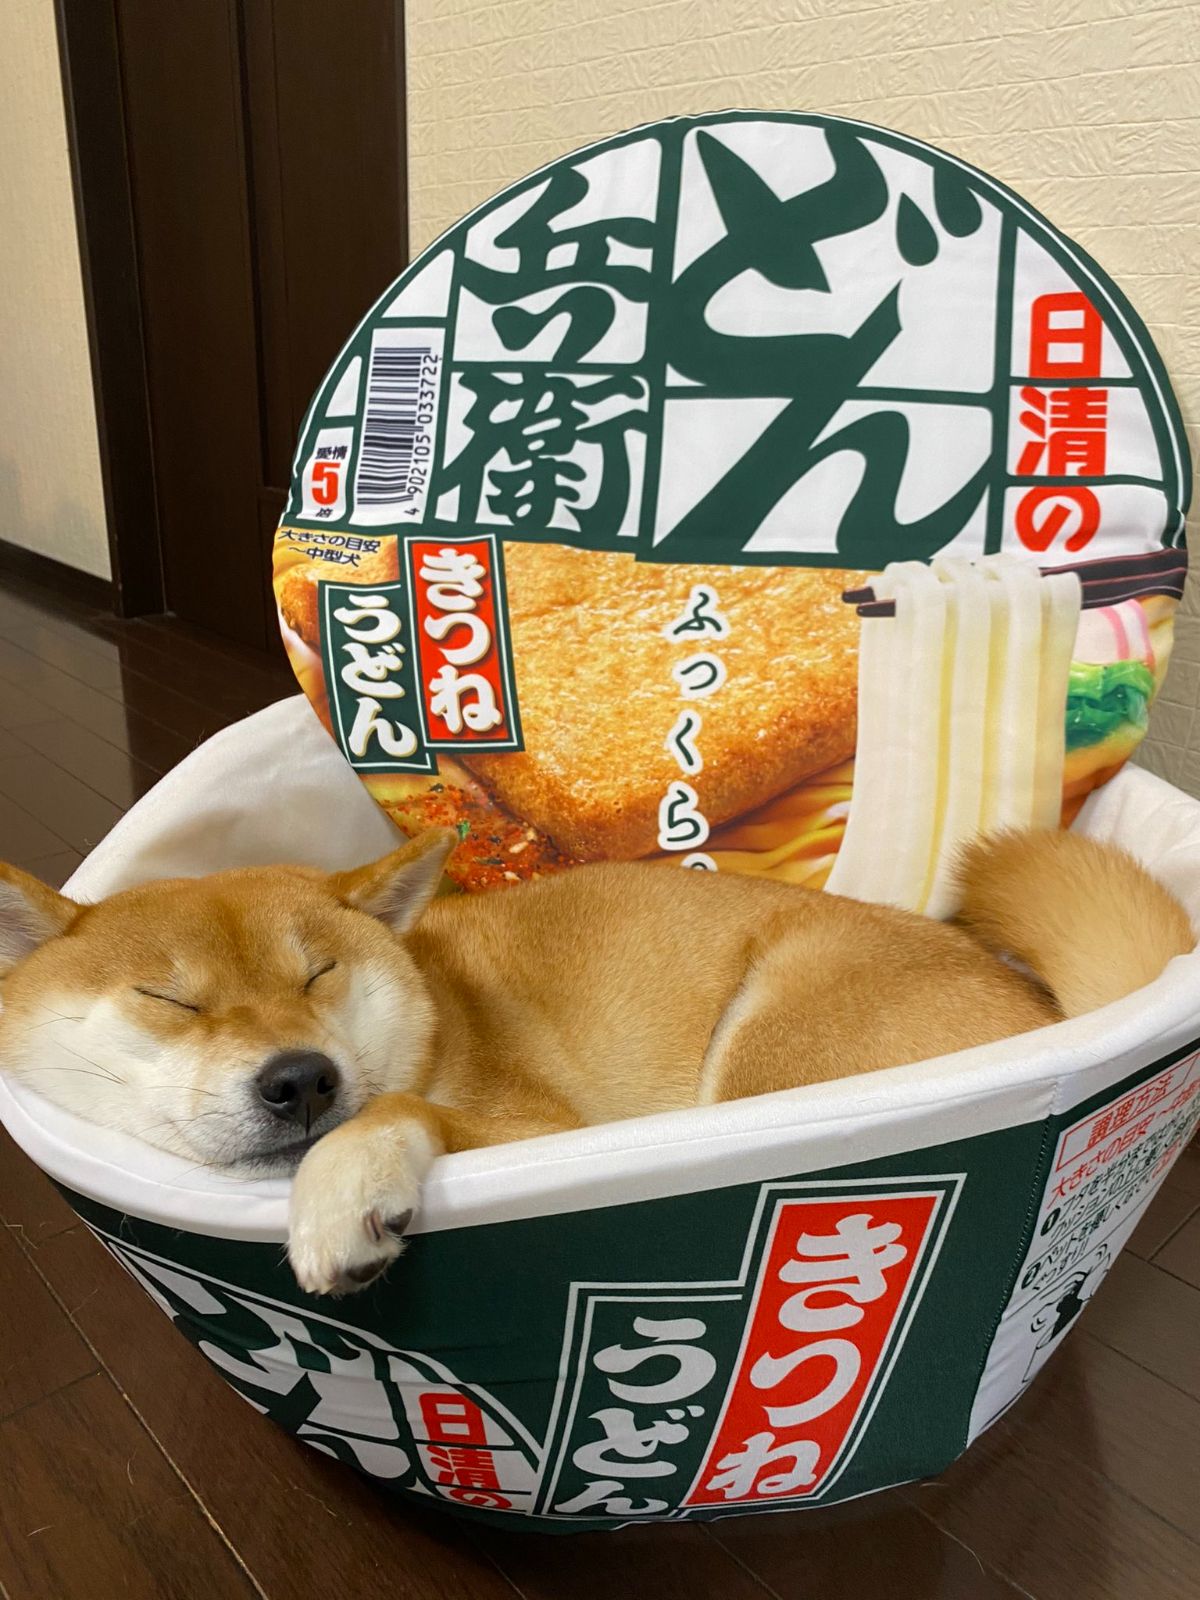 brown and white shiba inu sleeping in a green white and red dog bed with lid printed with Japanese food labels